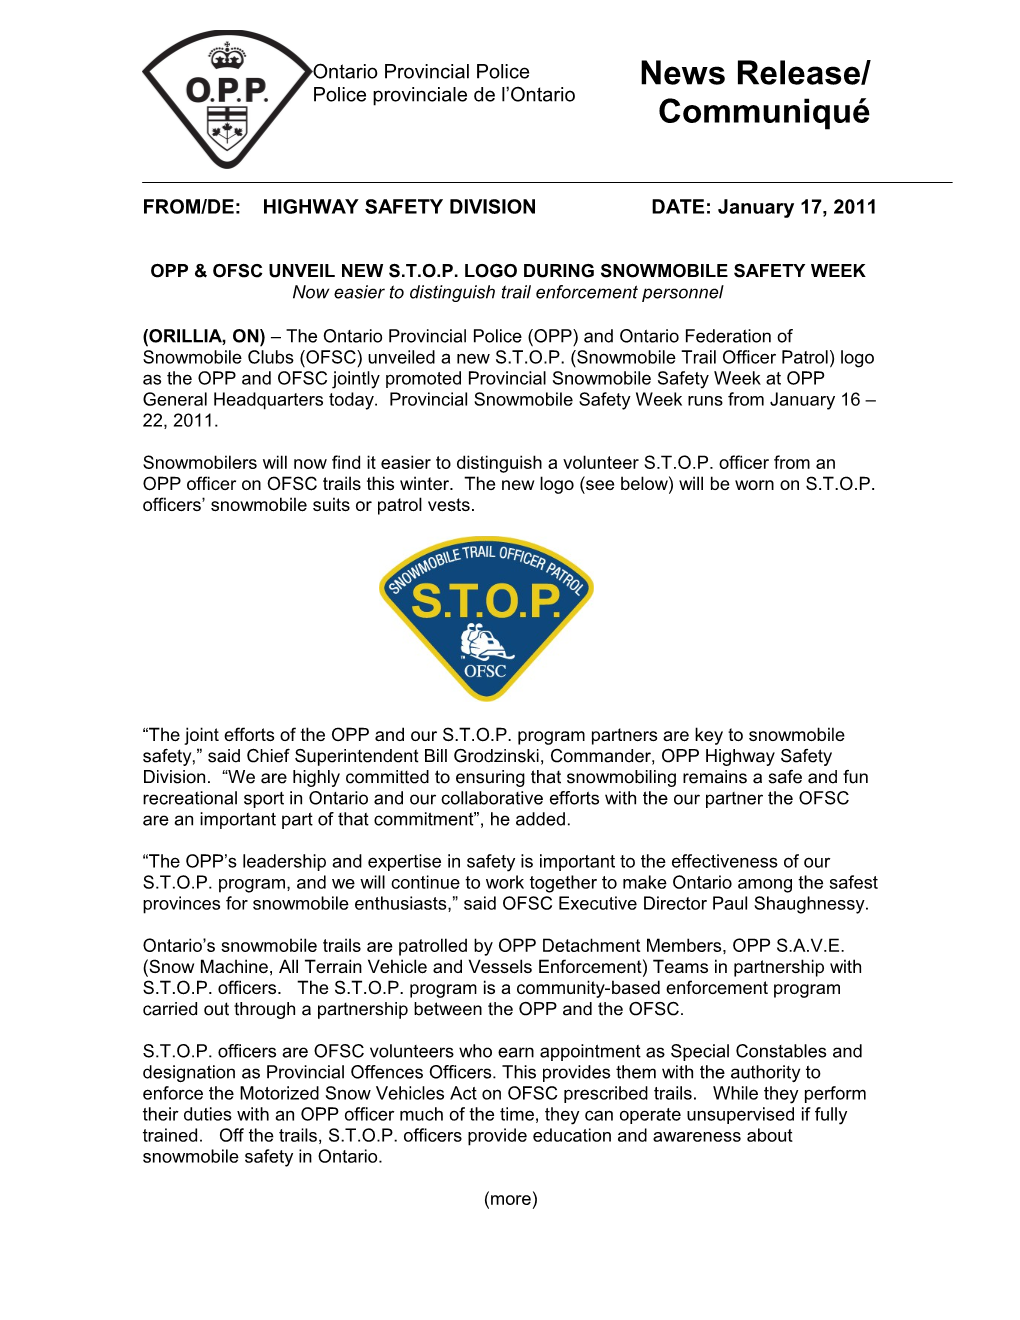 OPP & OFSC UNVEIL New S.T.O.P. Logo During Snowmobile Safety Week